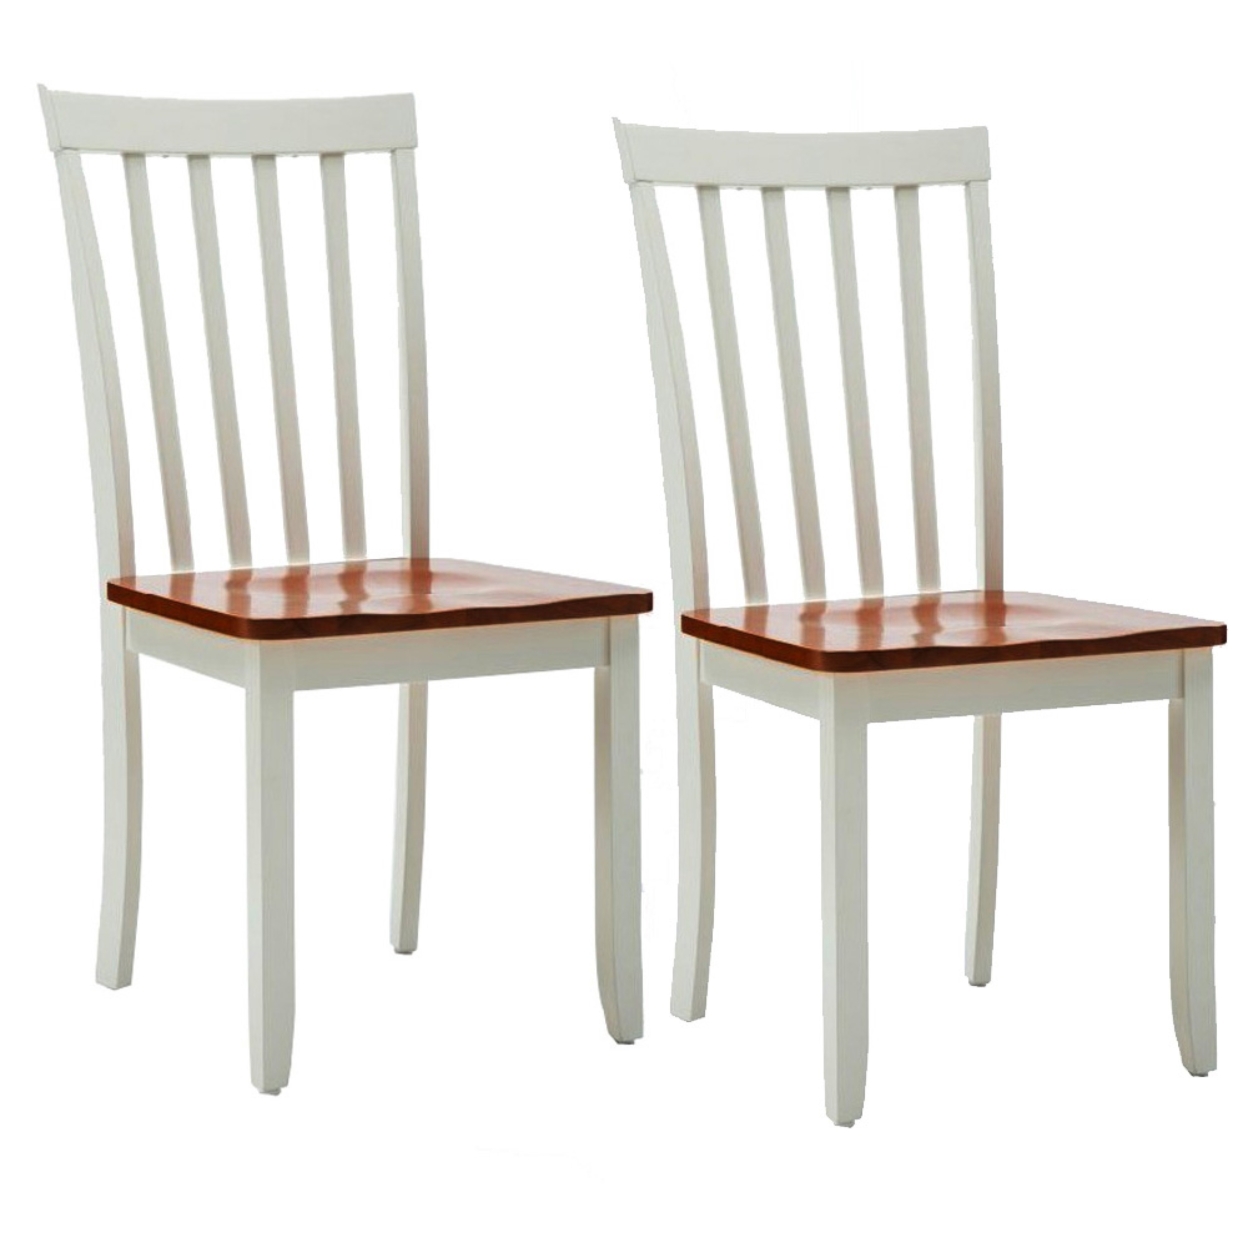 Wooden Seat Dining Chair With Slatted Backrest, Set Of 2, Brown And White- Saltoro Sherpi